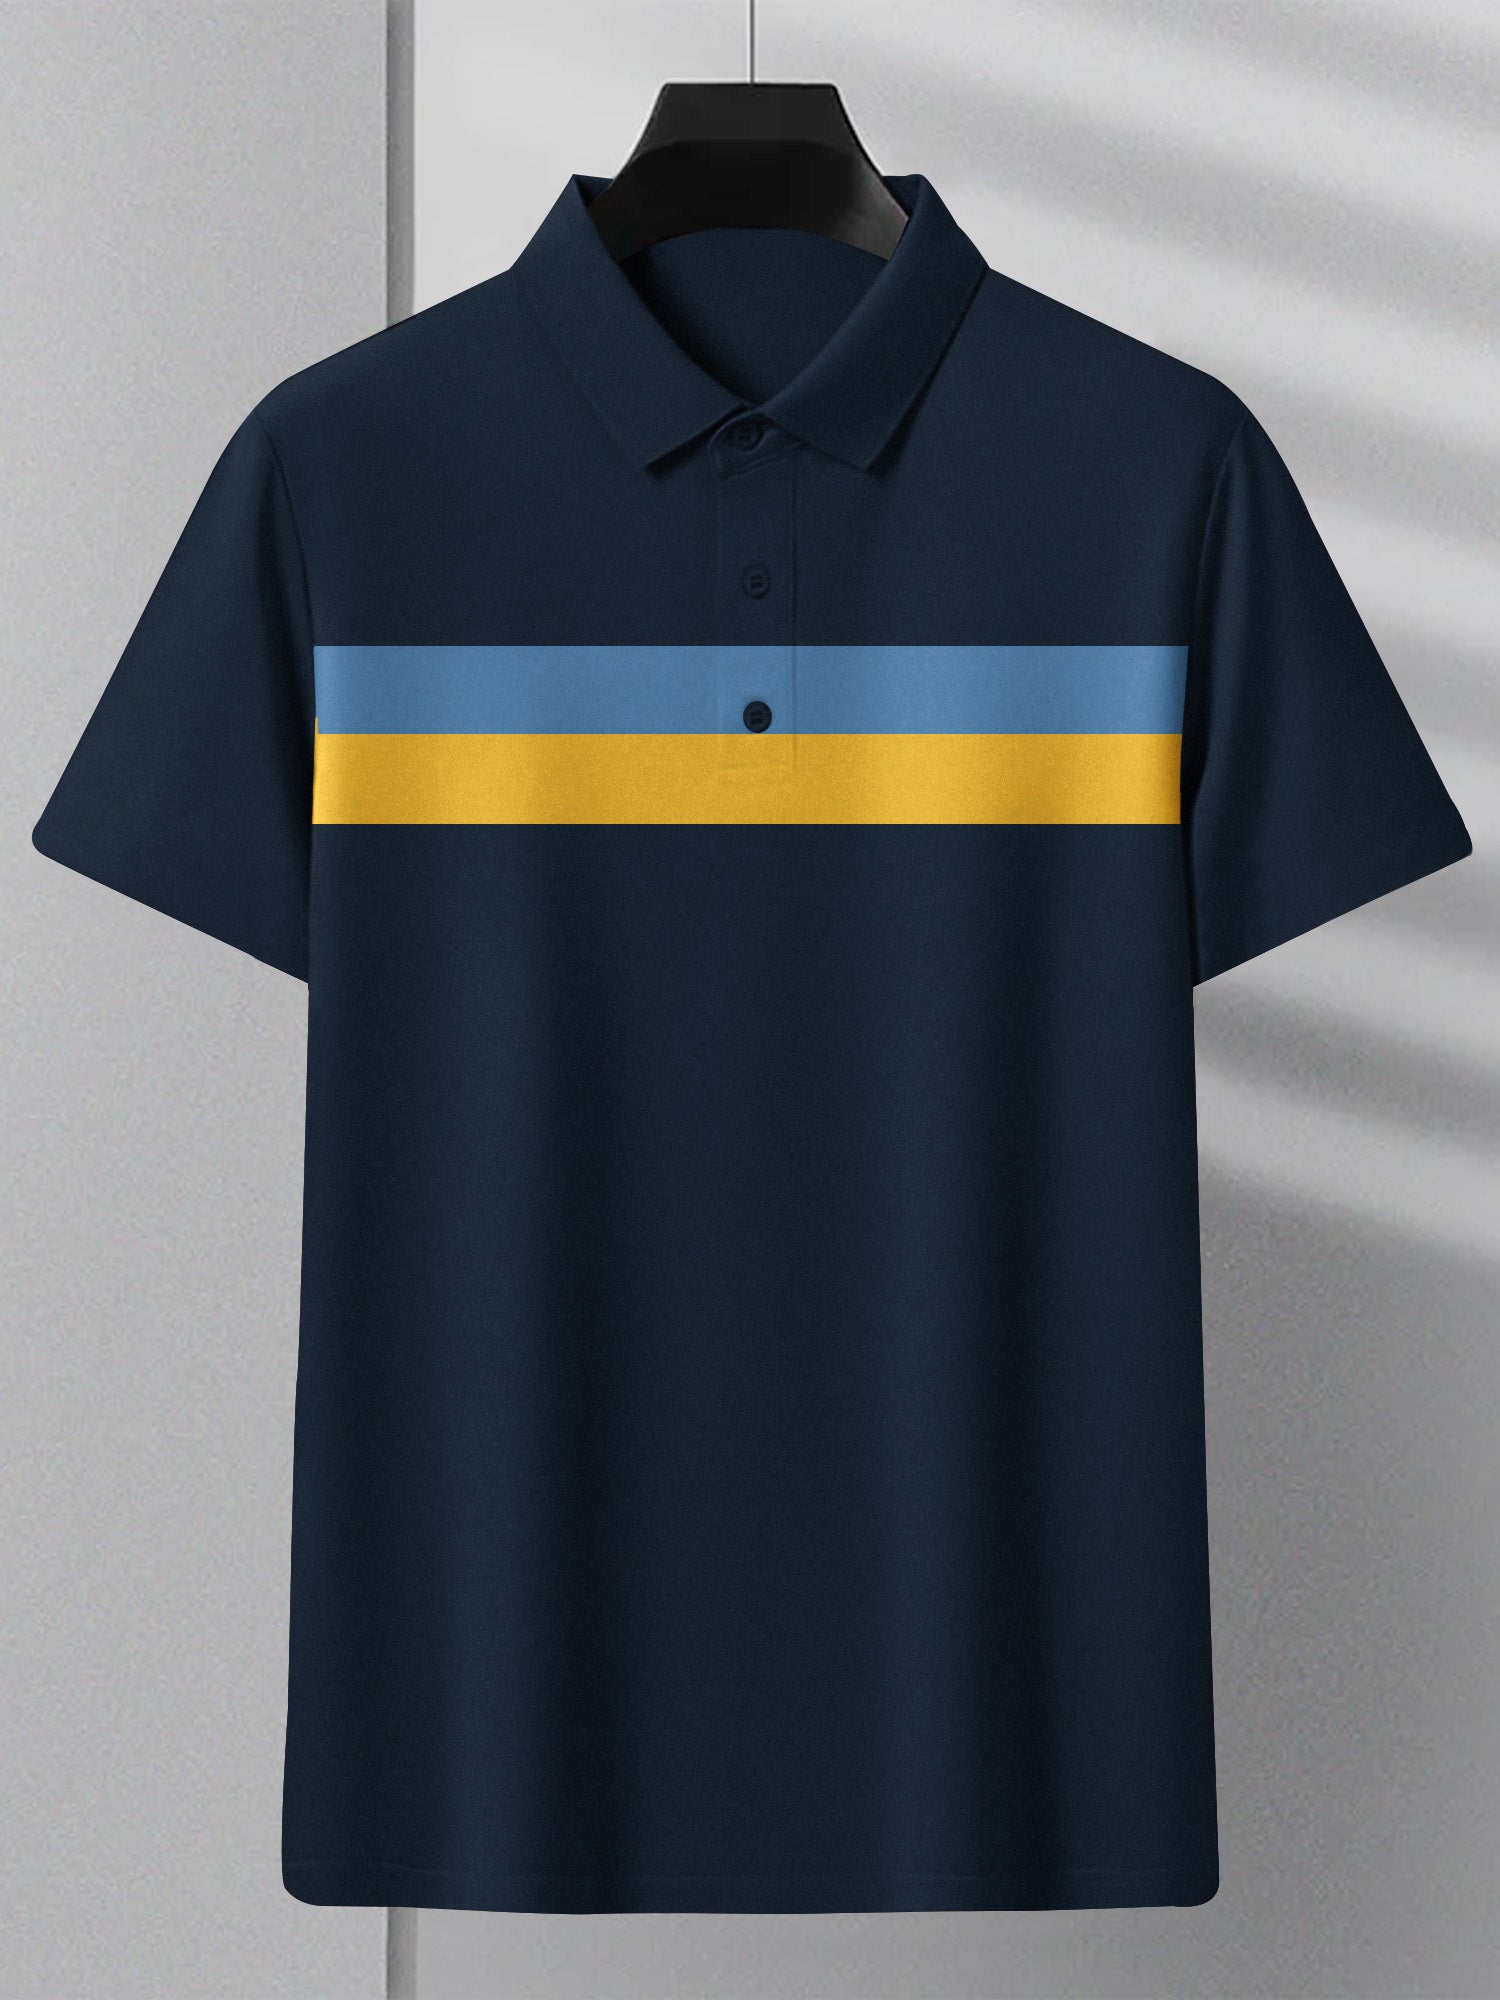 NXT Summer Polo Shirt For Men-Dark Navy With Yellow & Sky Stripe-BE708/BR12961